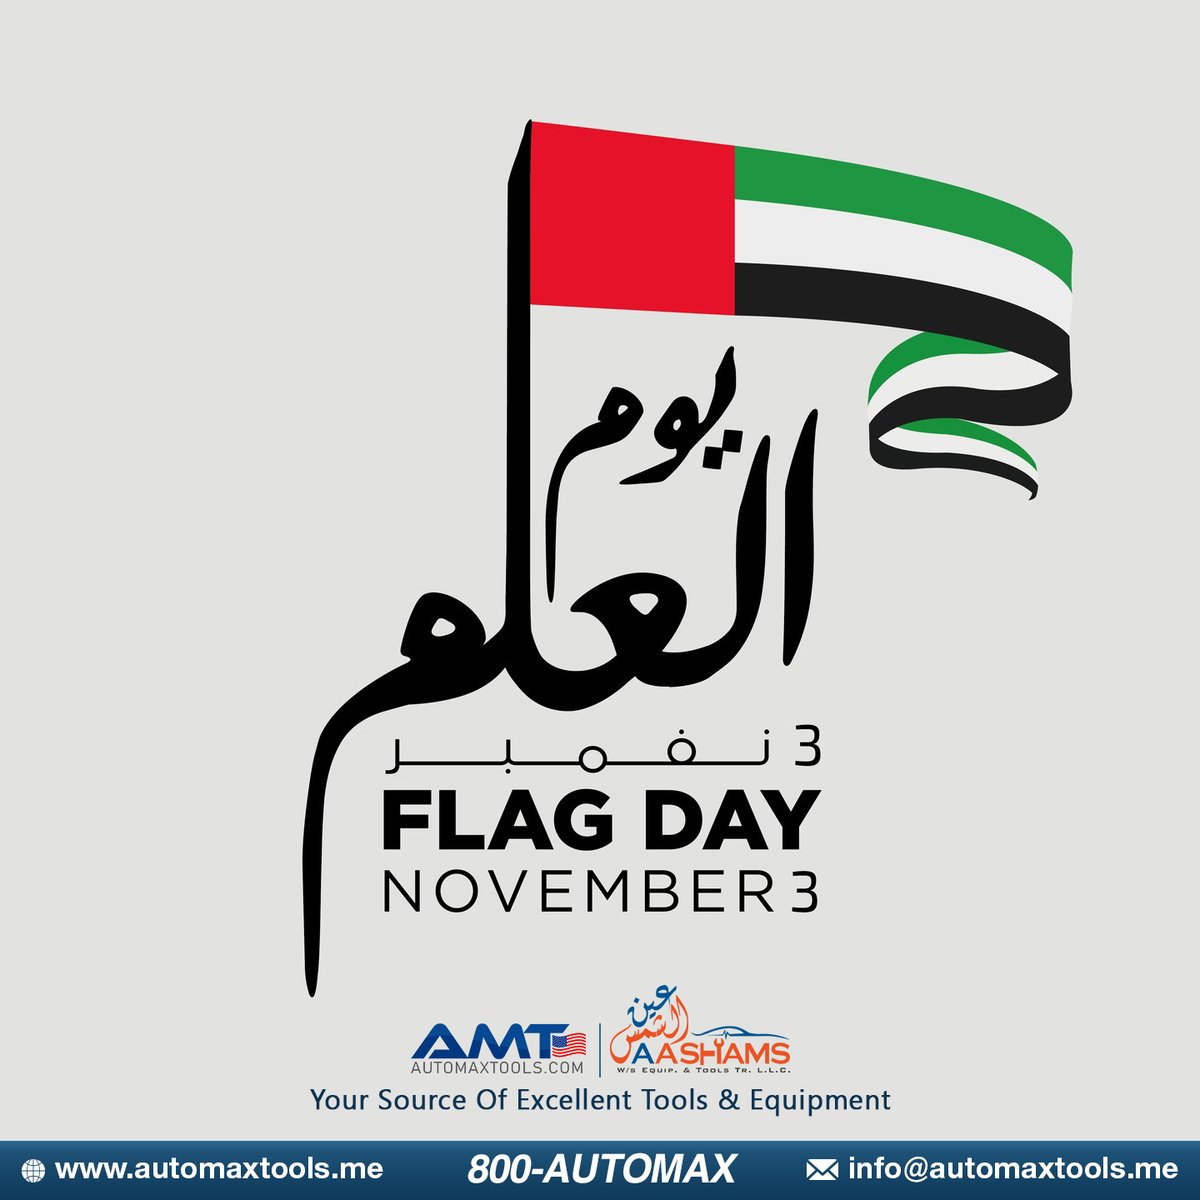 Today, on the occasion of #FlagDay we stand together as a family and express our pride & love towards this nation, & celebrate the glory of the #UAE flag.
#flagdayuae #happyflagdayuae #flagday2022 #flagdayuae🇦🇪 #dubai